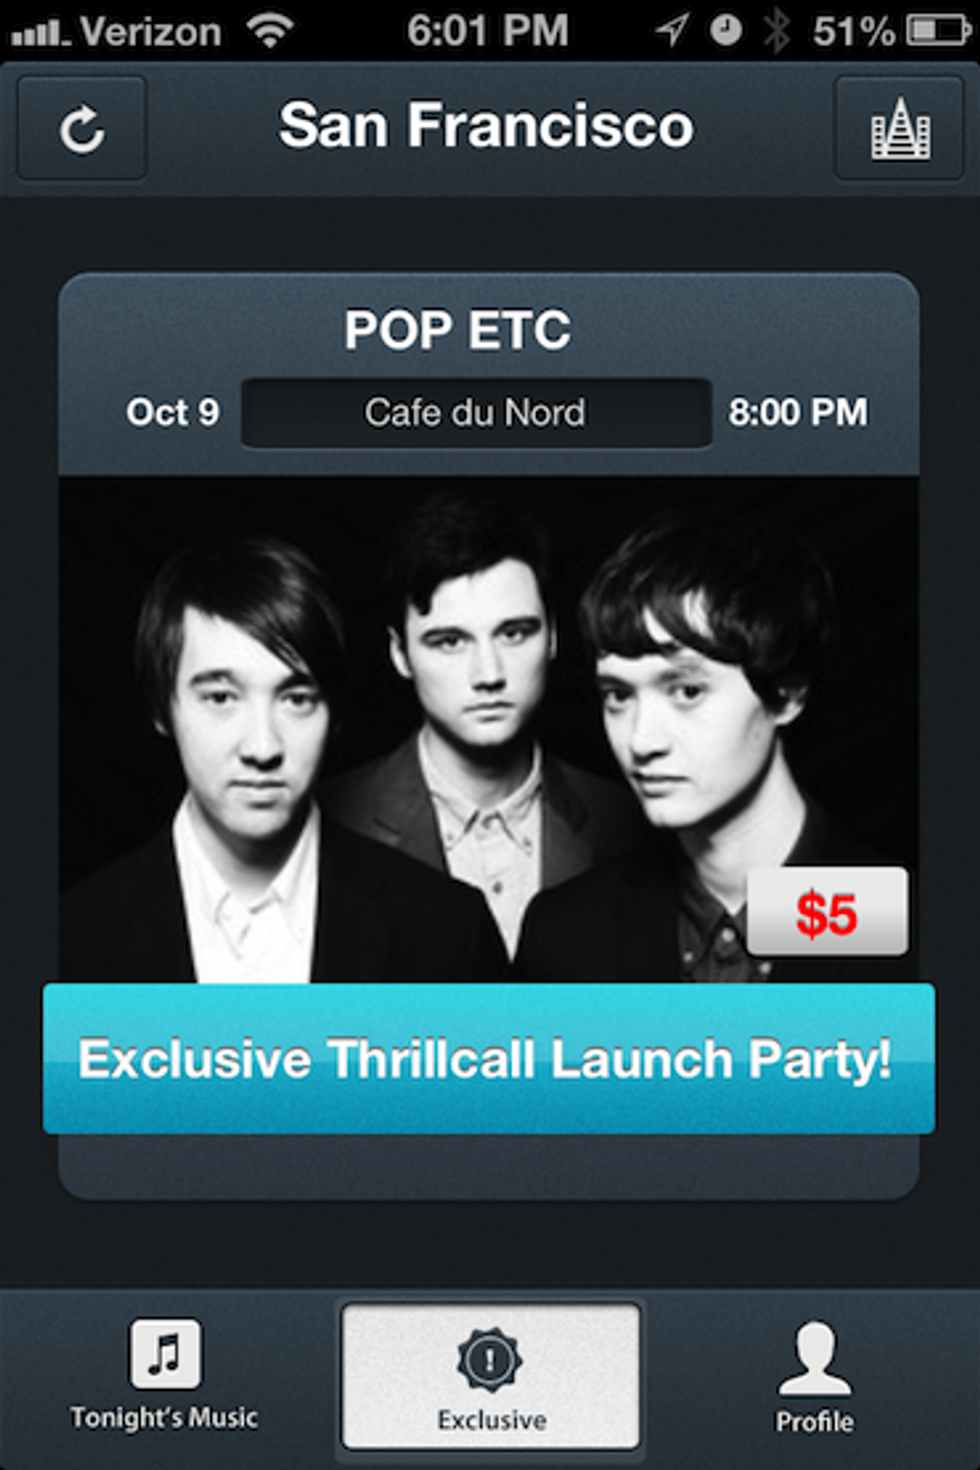 Thrillcall is the Best New App to Discover SF's Live Music Scene